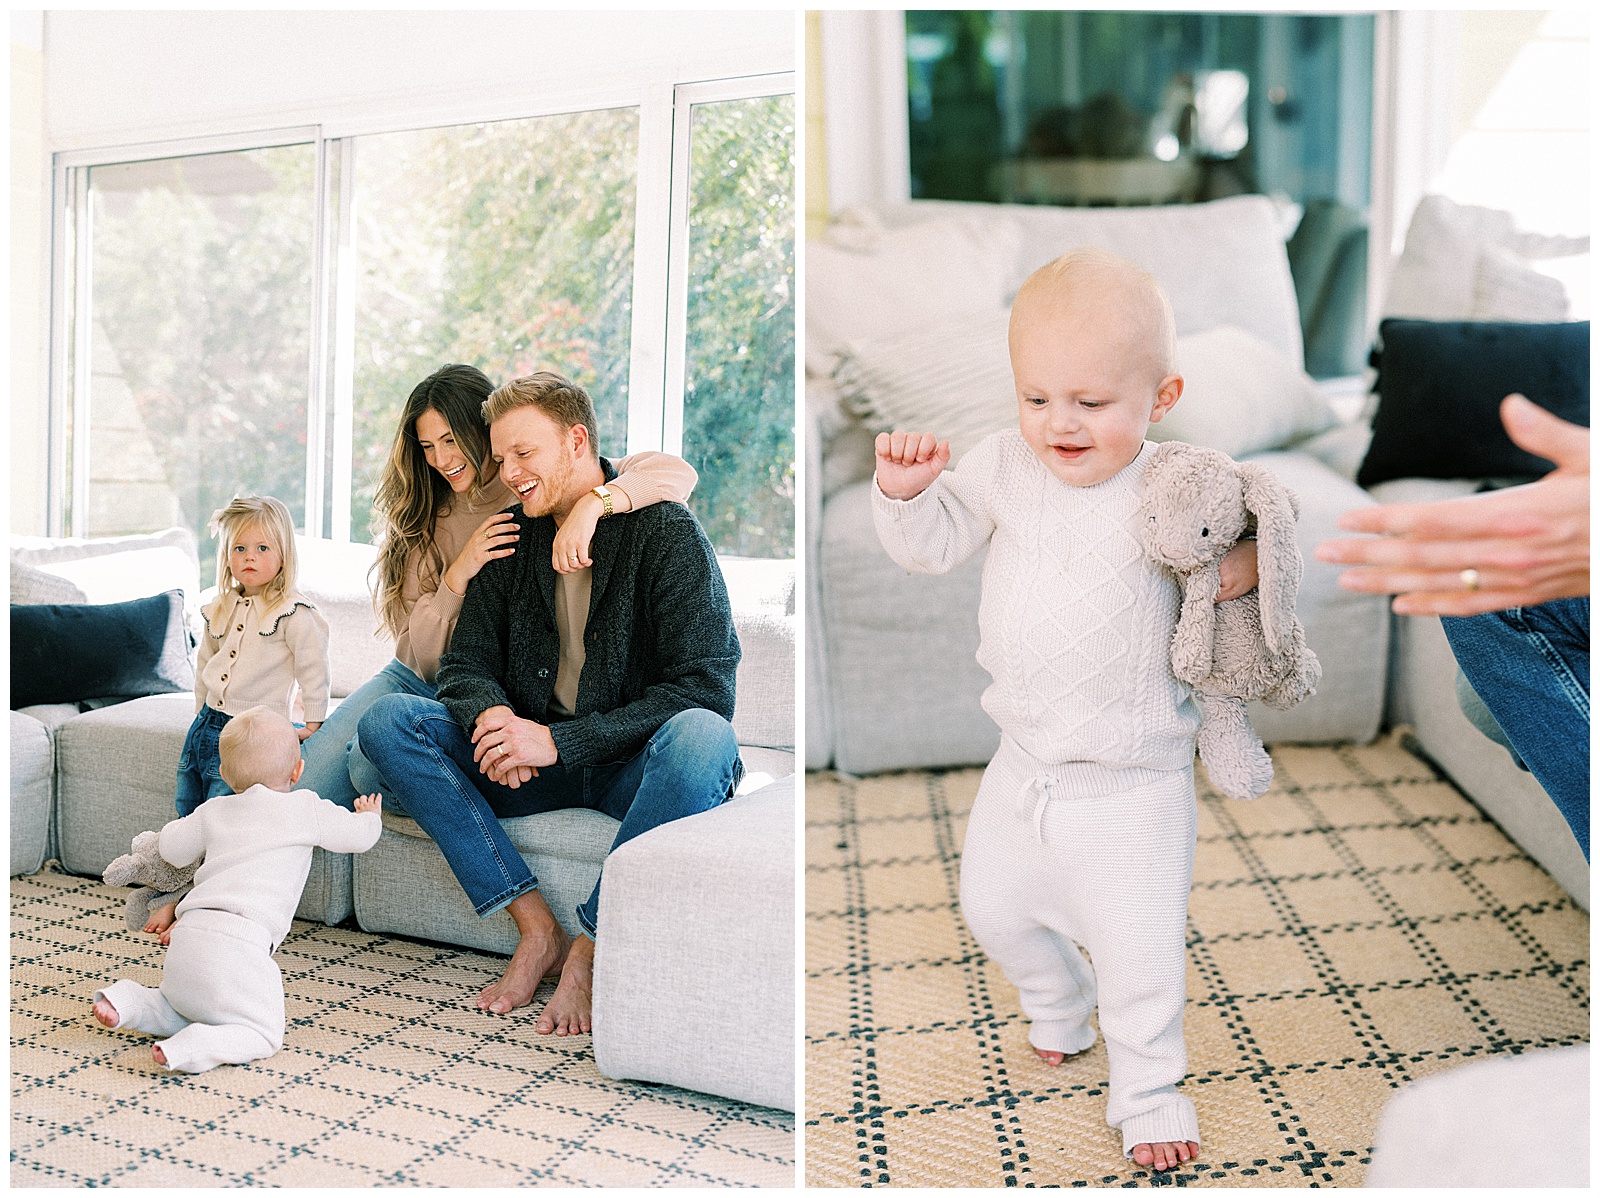 Mom and dad play with their daughter and baby son on the couch in their home for professional family photos